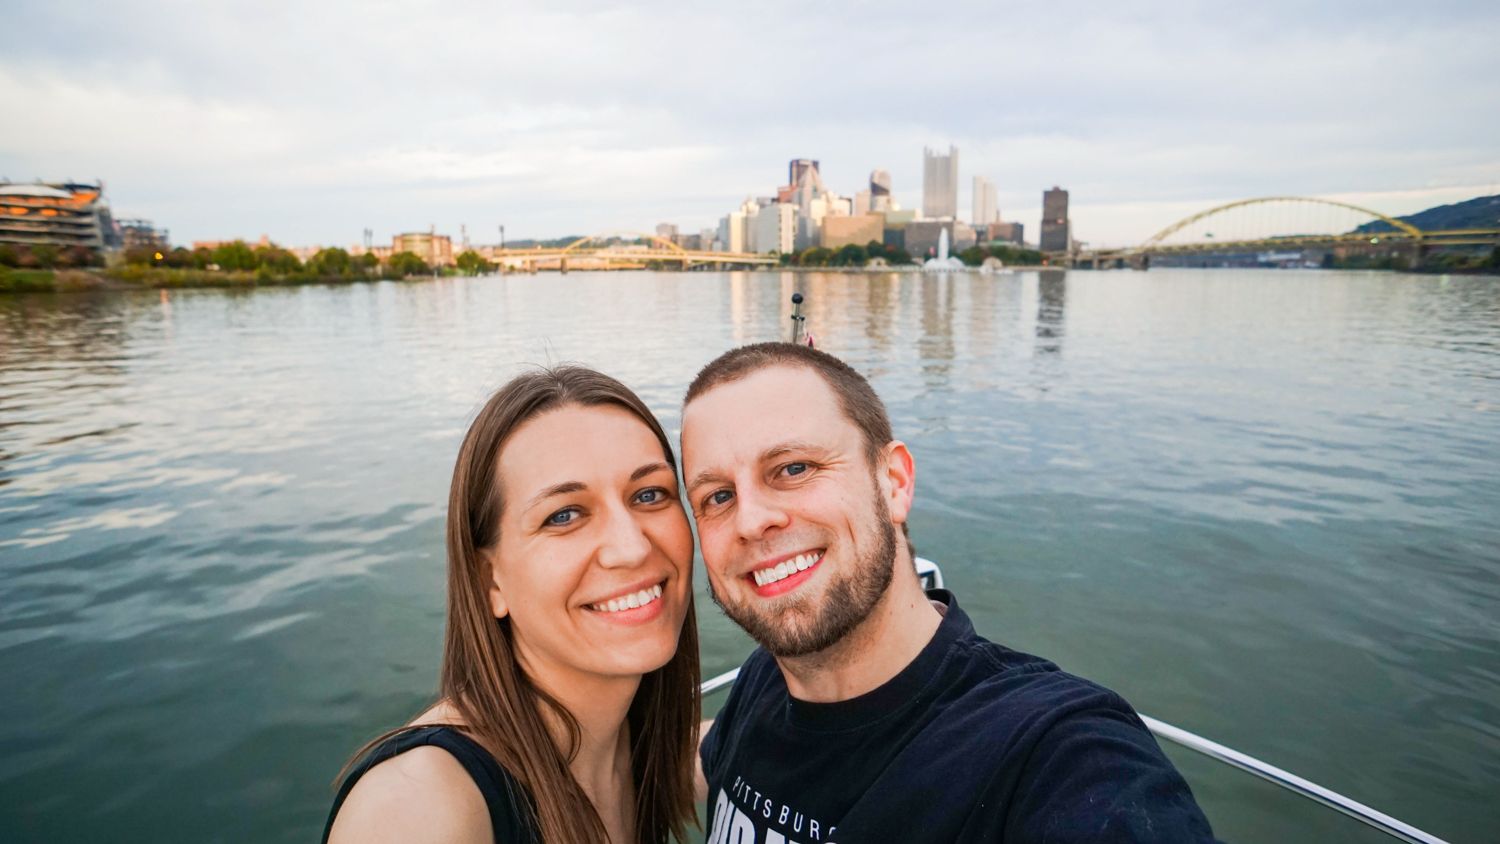 Teaching others about your city is a beautiful kind of education! For Pittsburgh, PA, "Discover the Burgh" has become a great resource for those looking to visit Pittsburgh, as well as locals looking for the best things to do around the city. Pictured: A rare selfie from Jeremy and Angie.